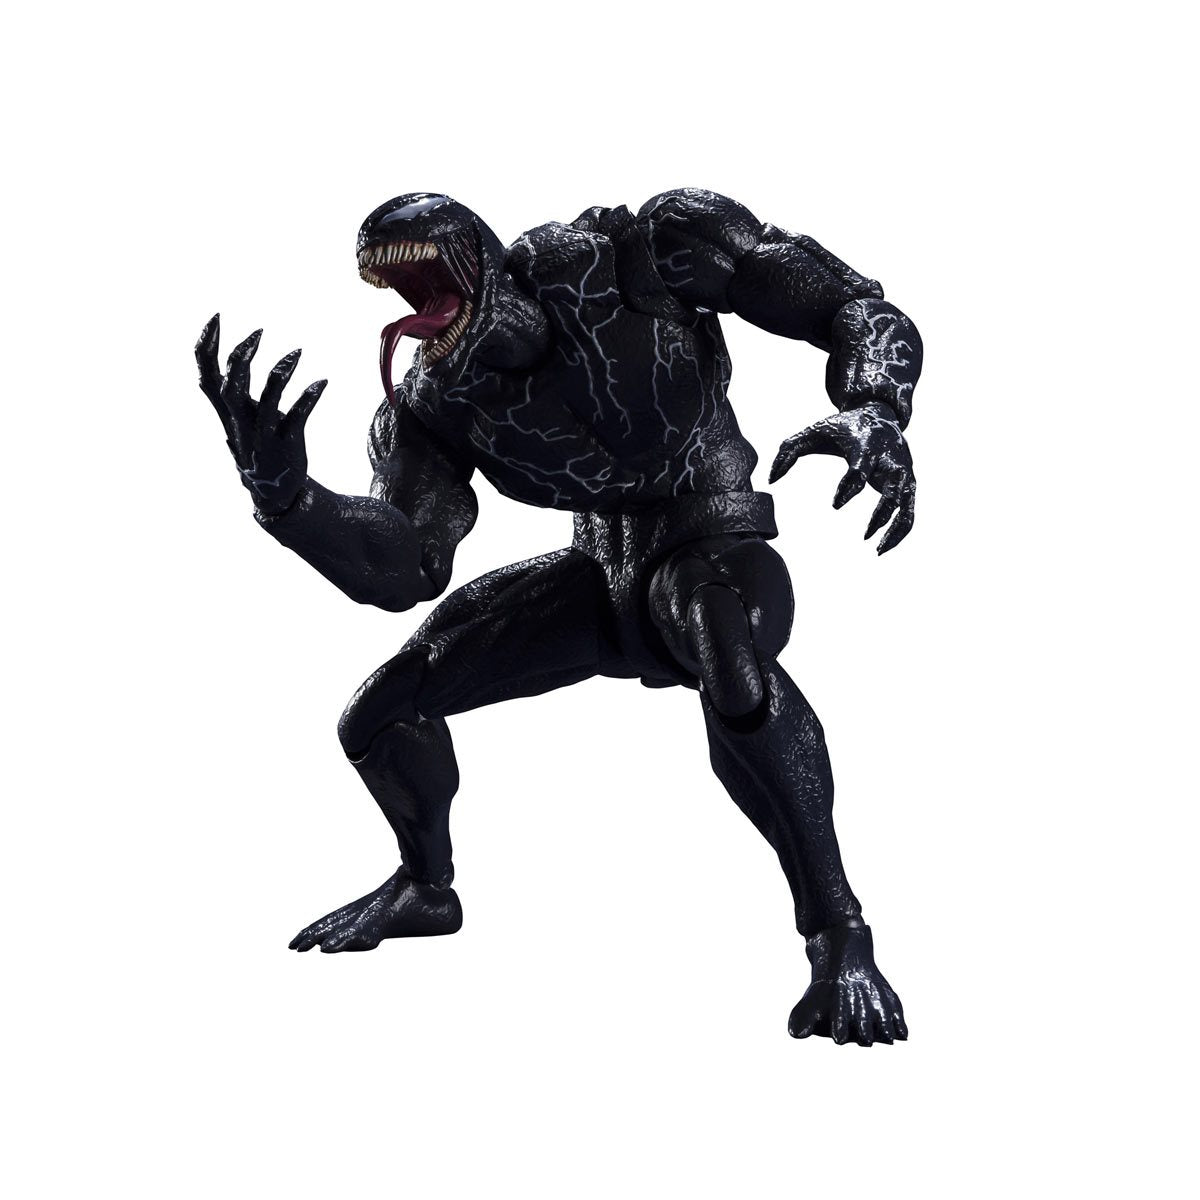 Venom: Let There Be Carnage S.H.Figuarts Action Figure by Bandai -SH Figuarts - India - www.superherotoystore.com